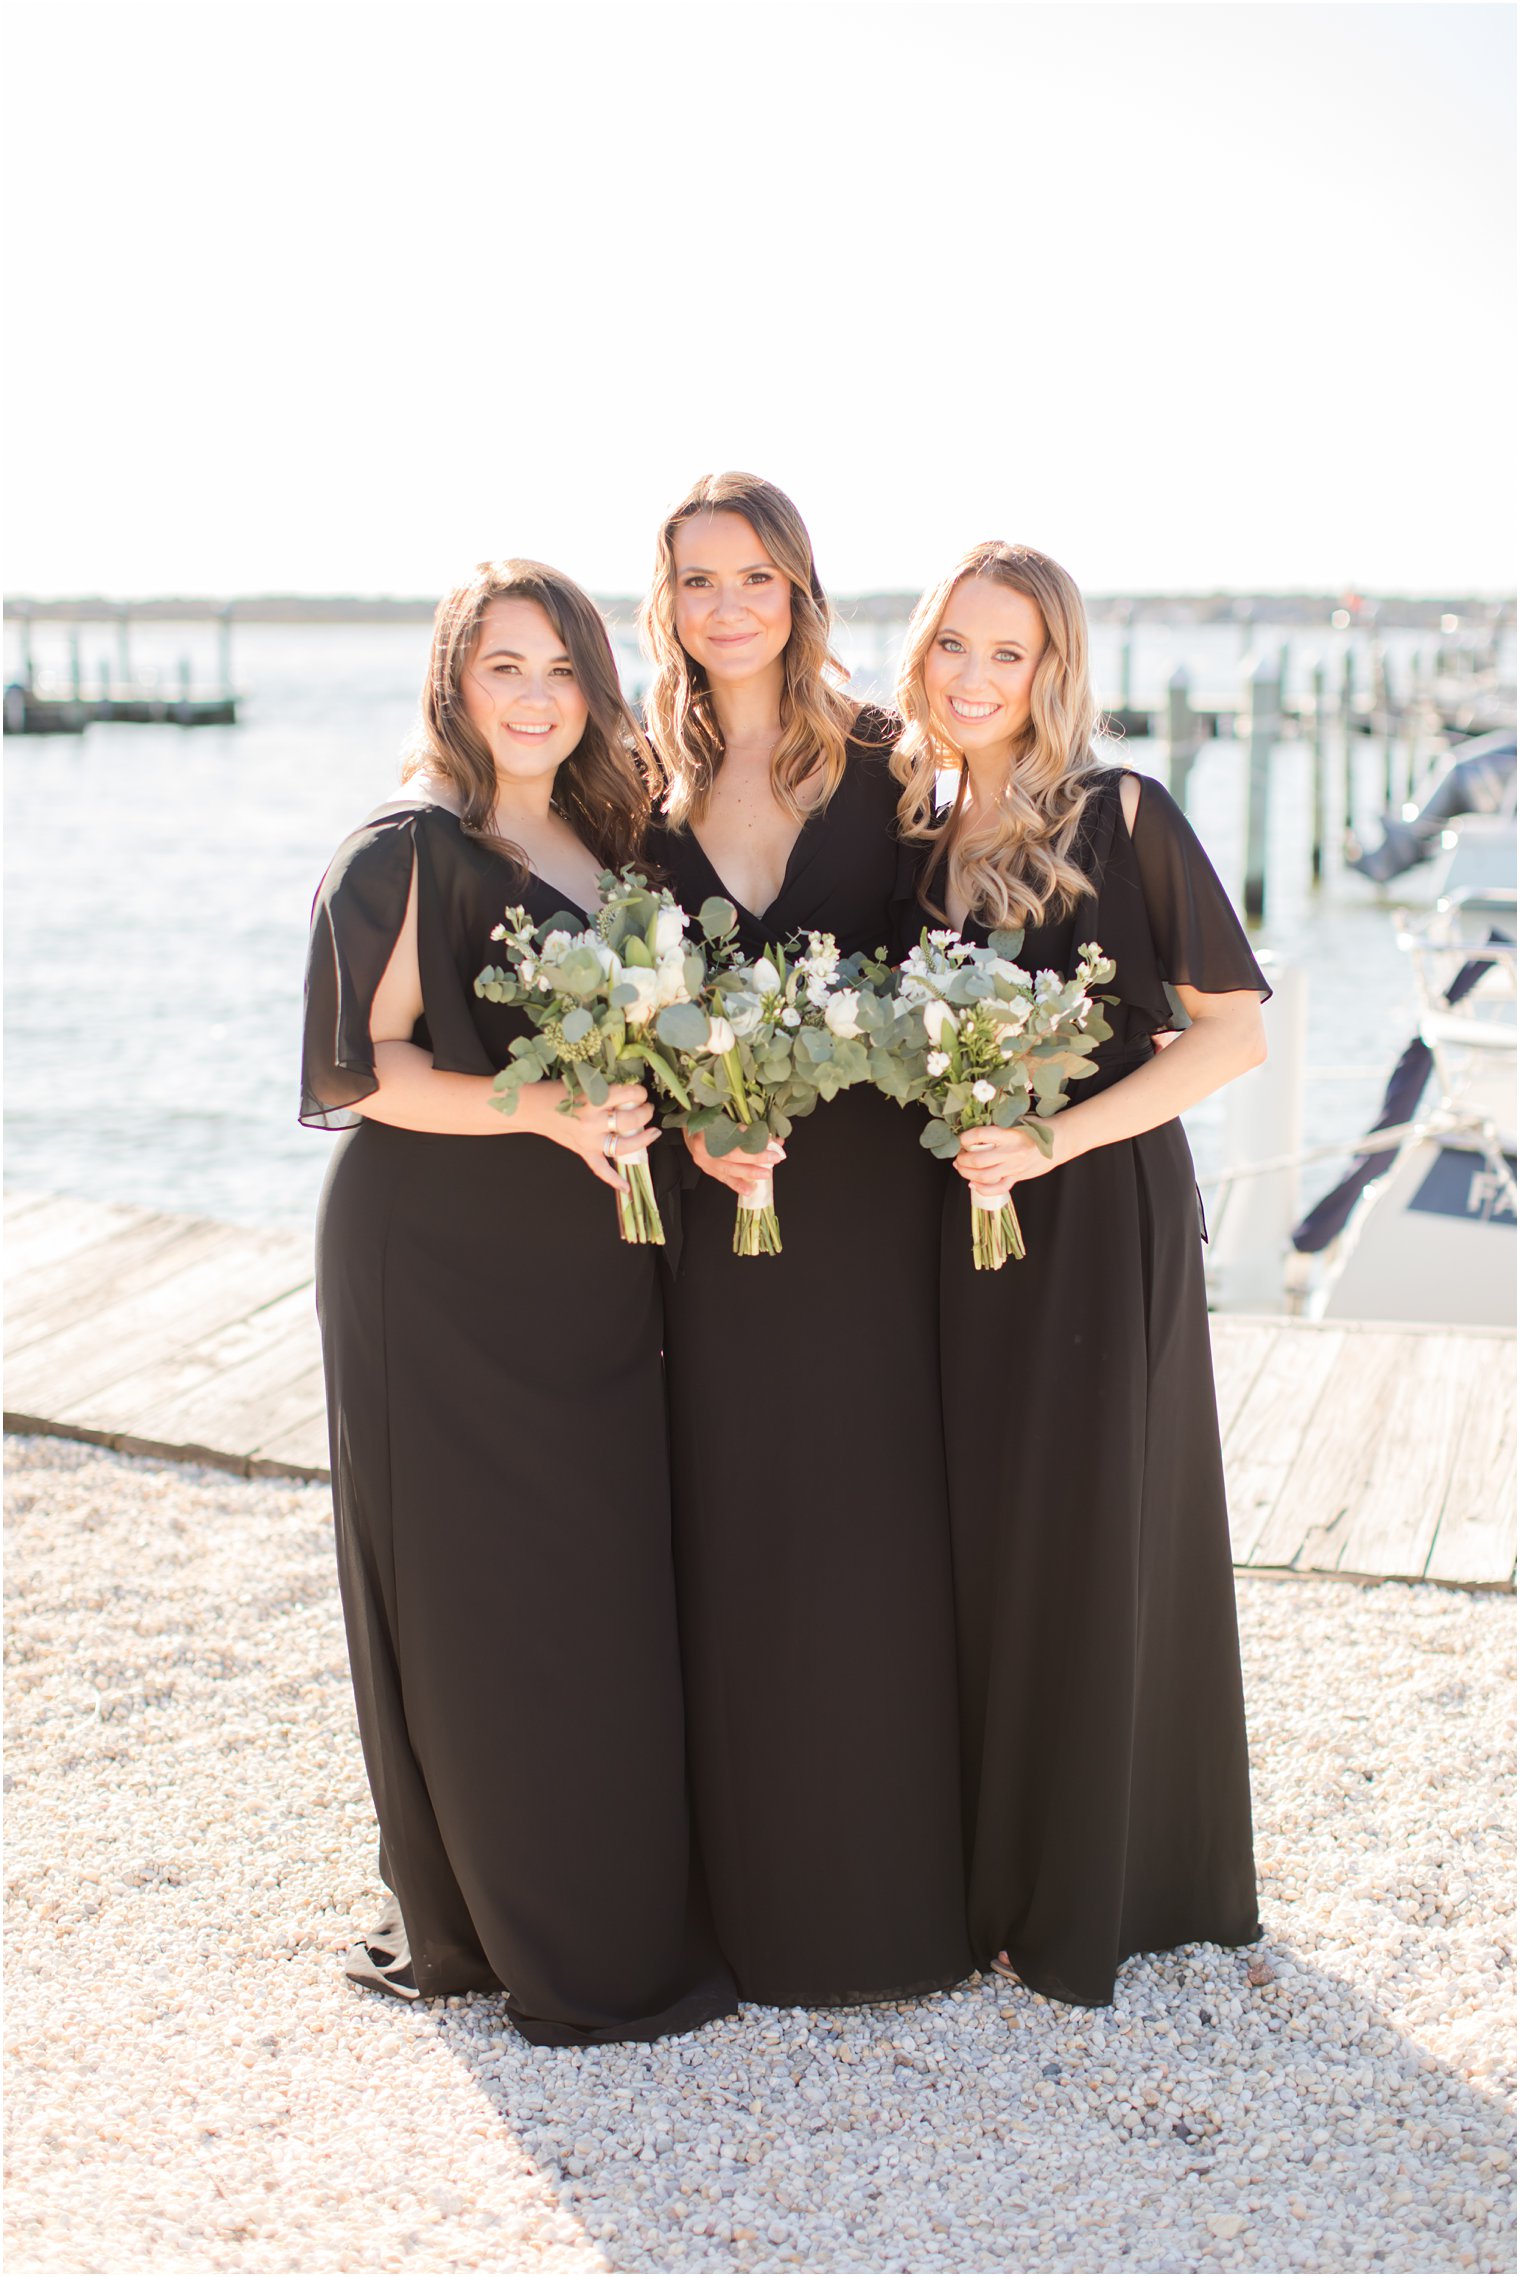 bridesmaids in black dresses hold bouquets with white flowers and eucalyptus leaves